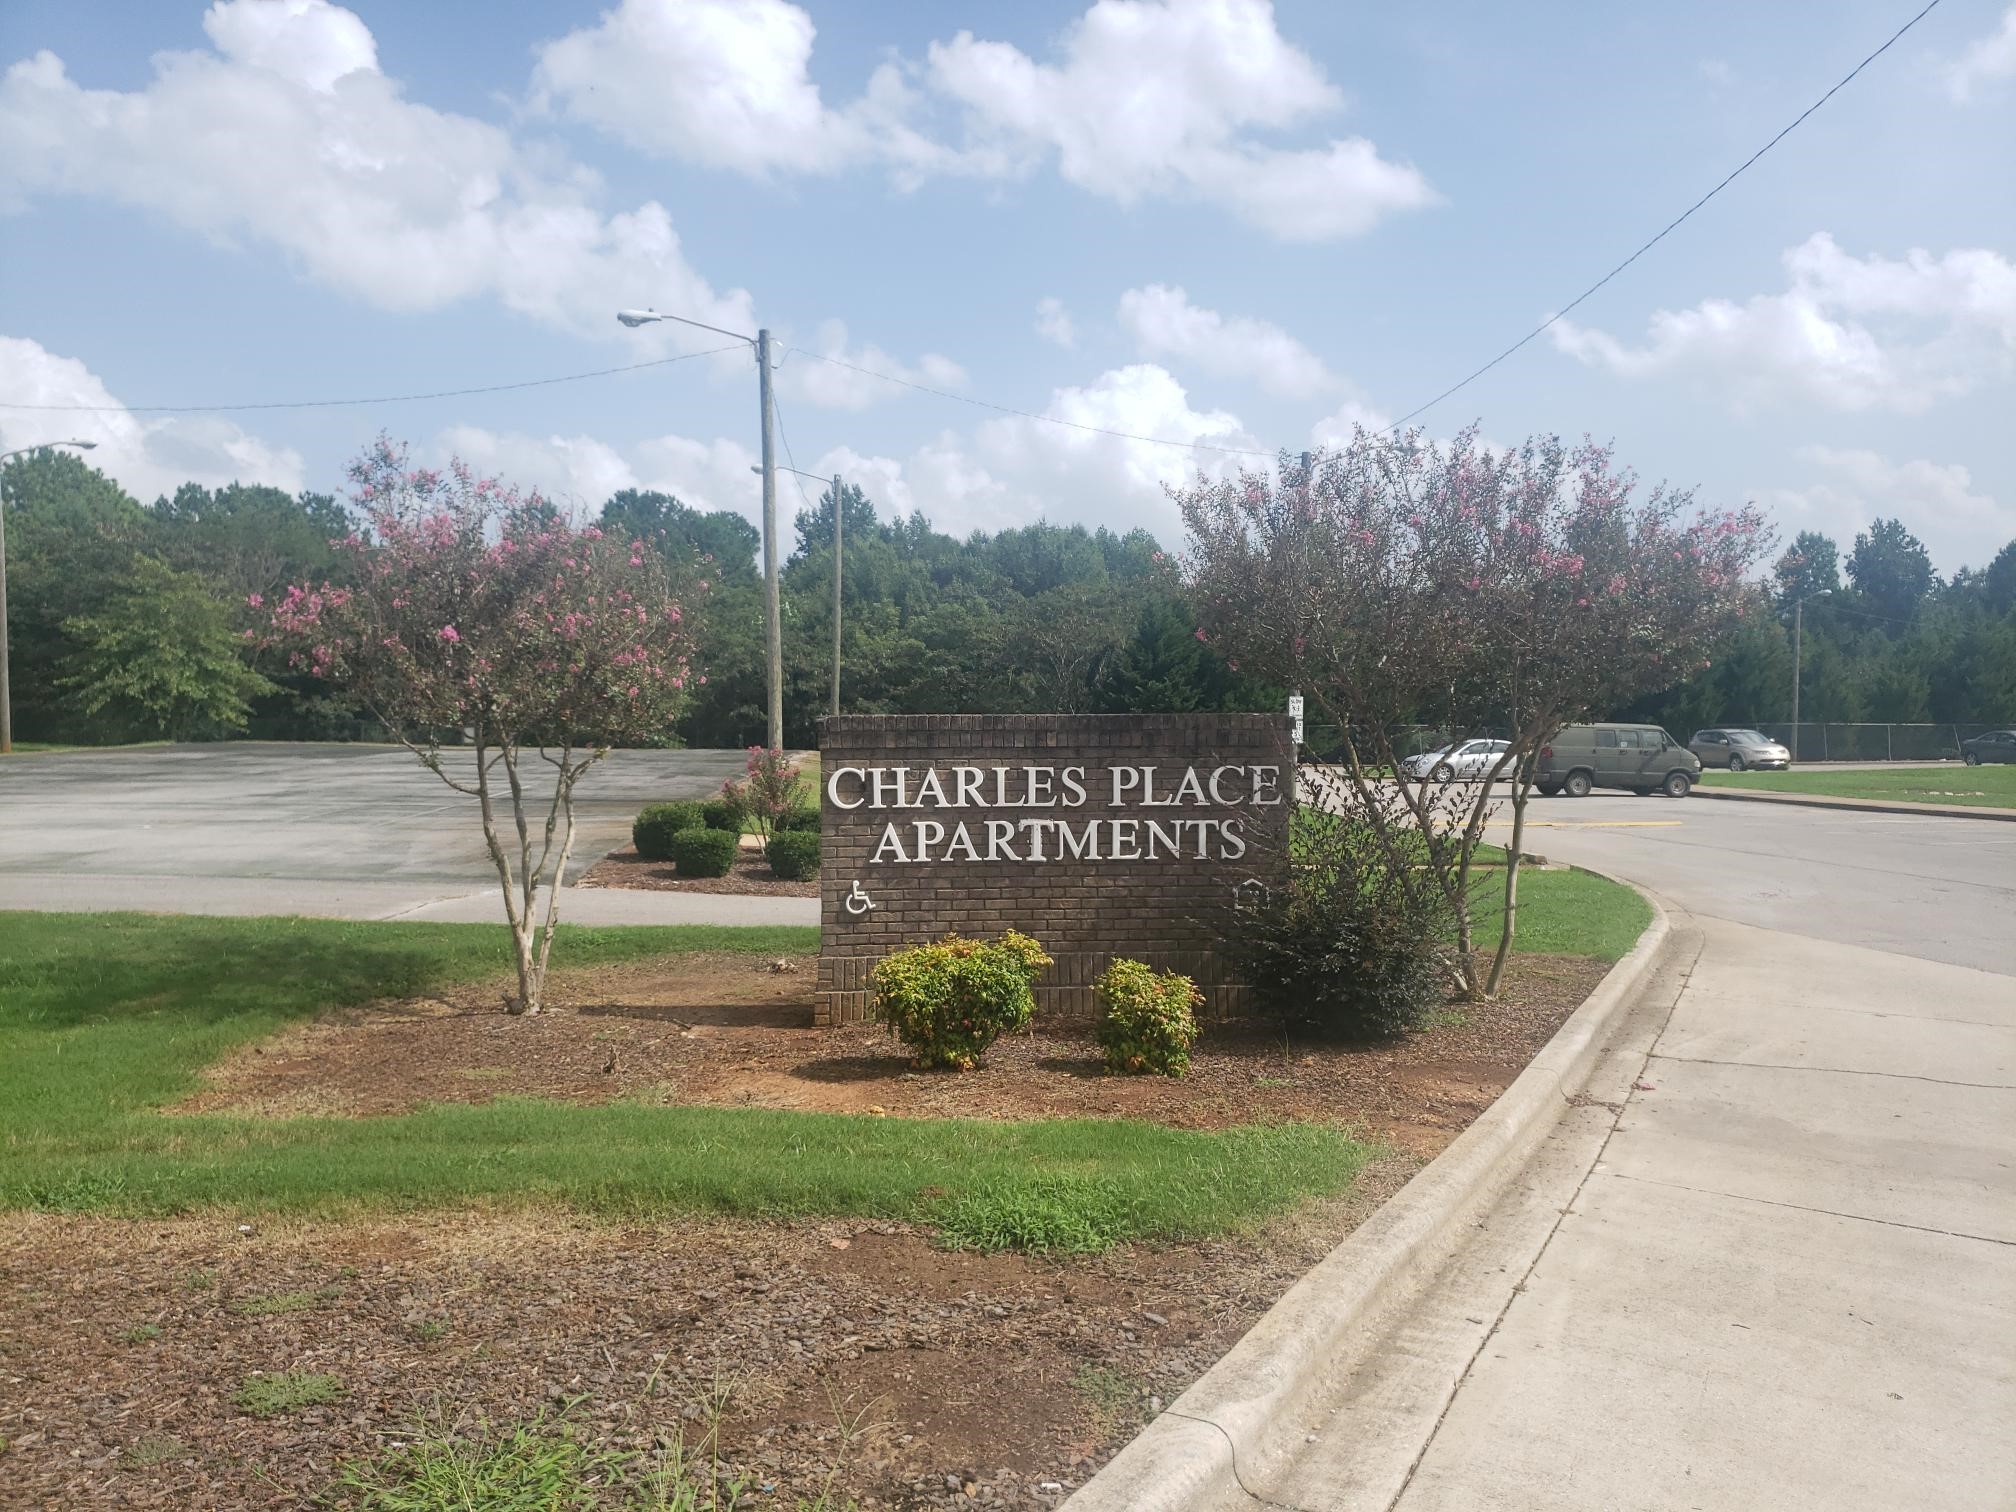 Charles Place Apartments